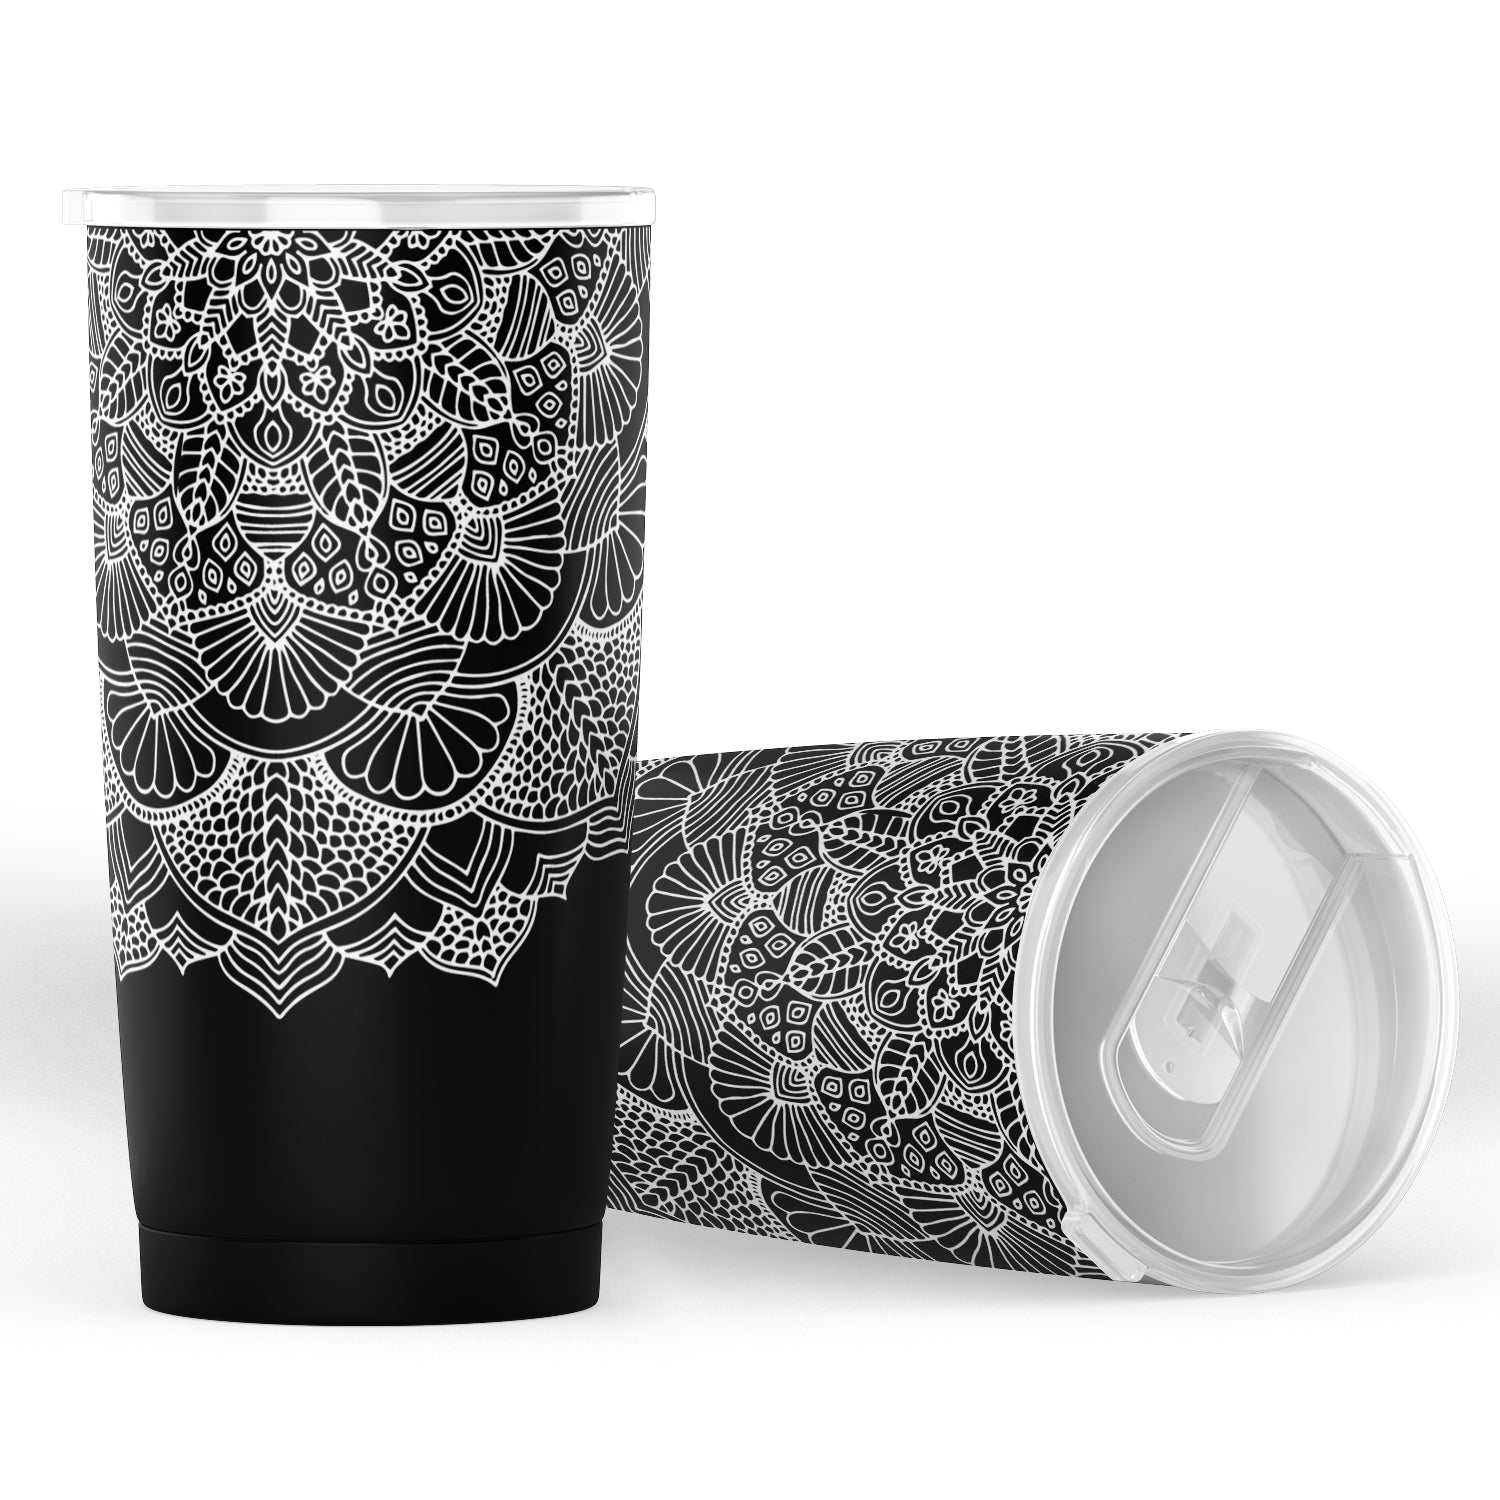 ANDAM Stainless Steel Tumbler